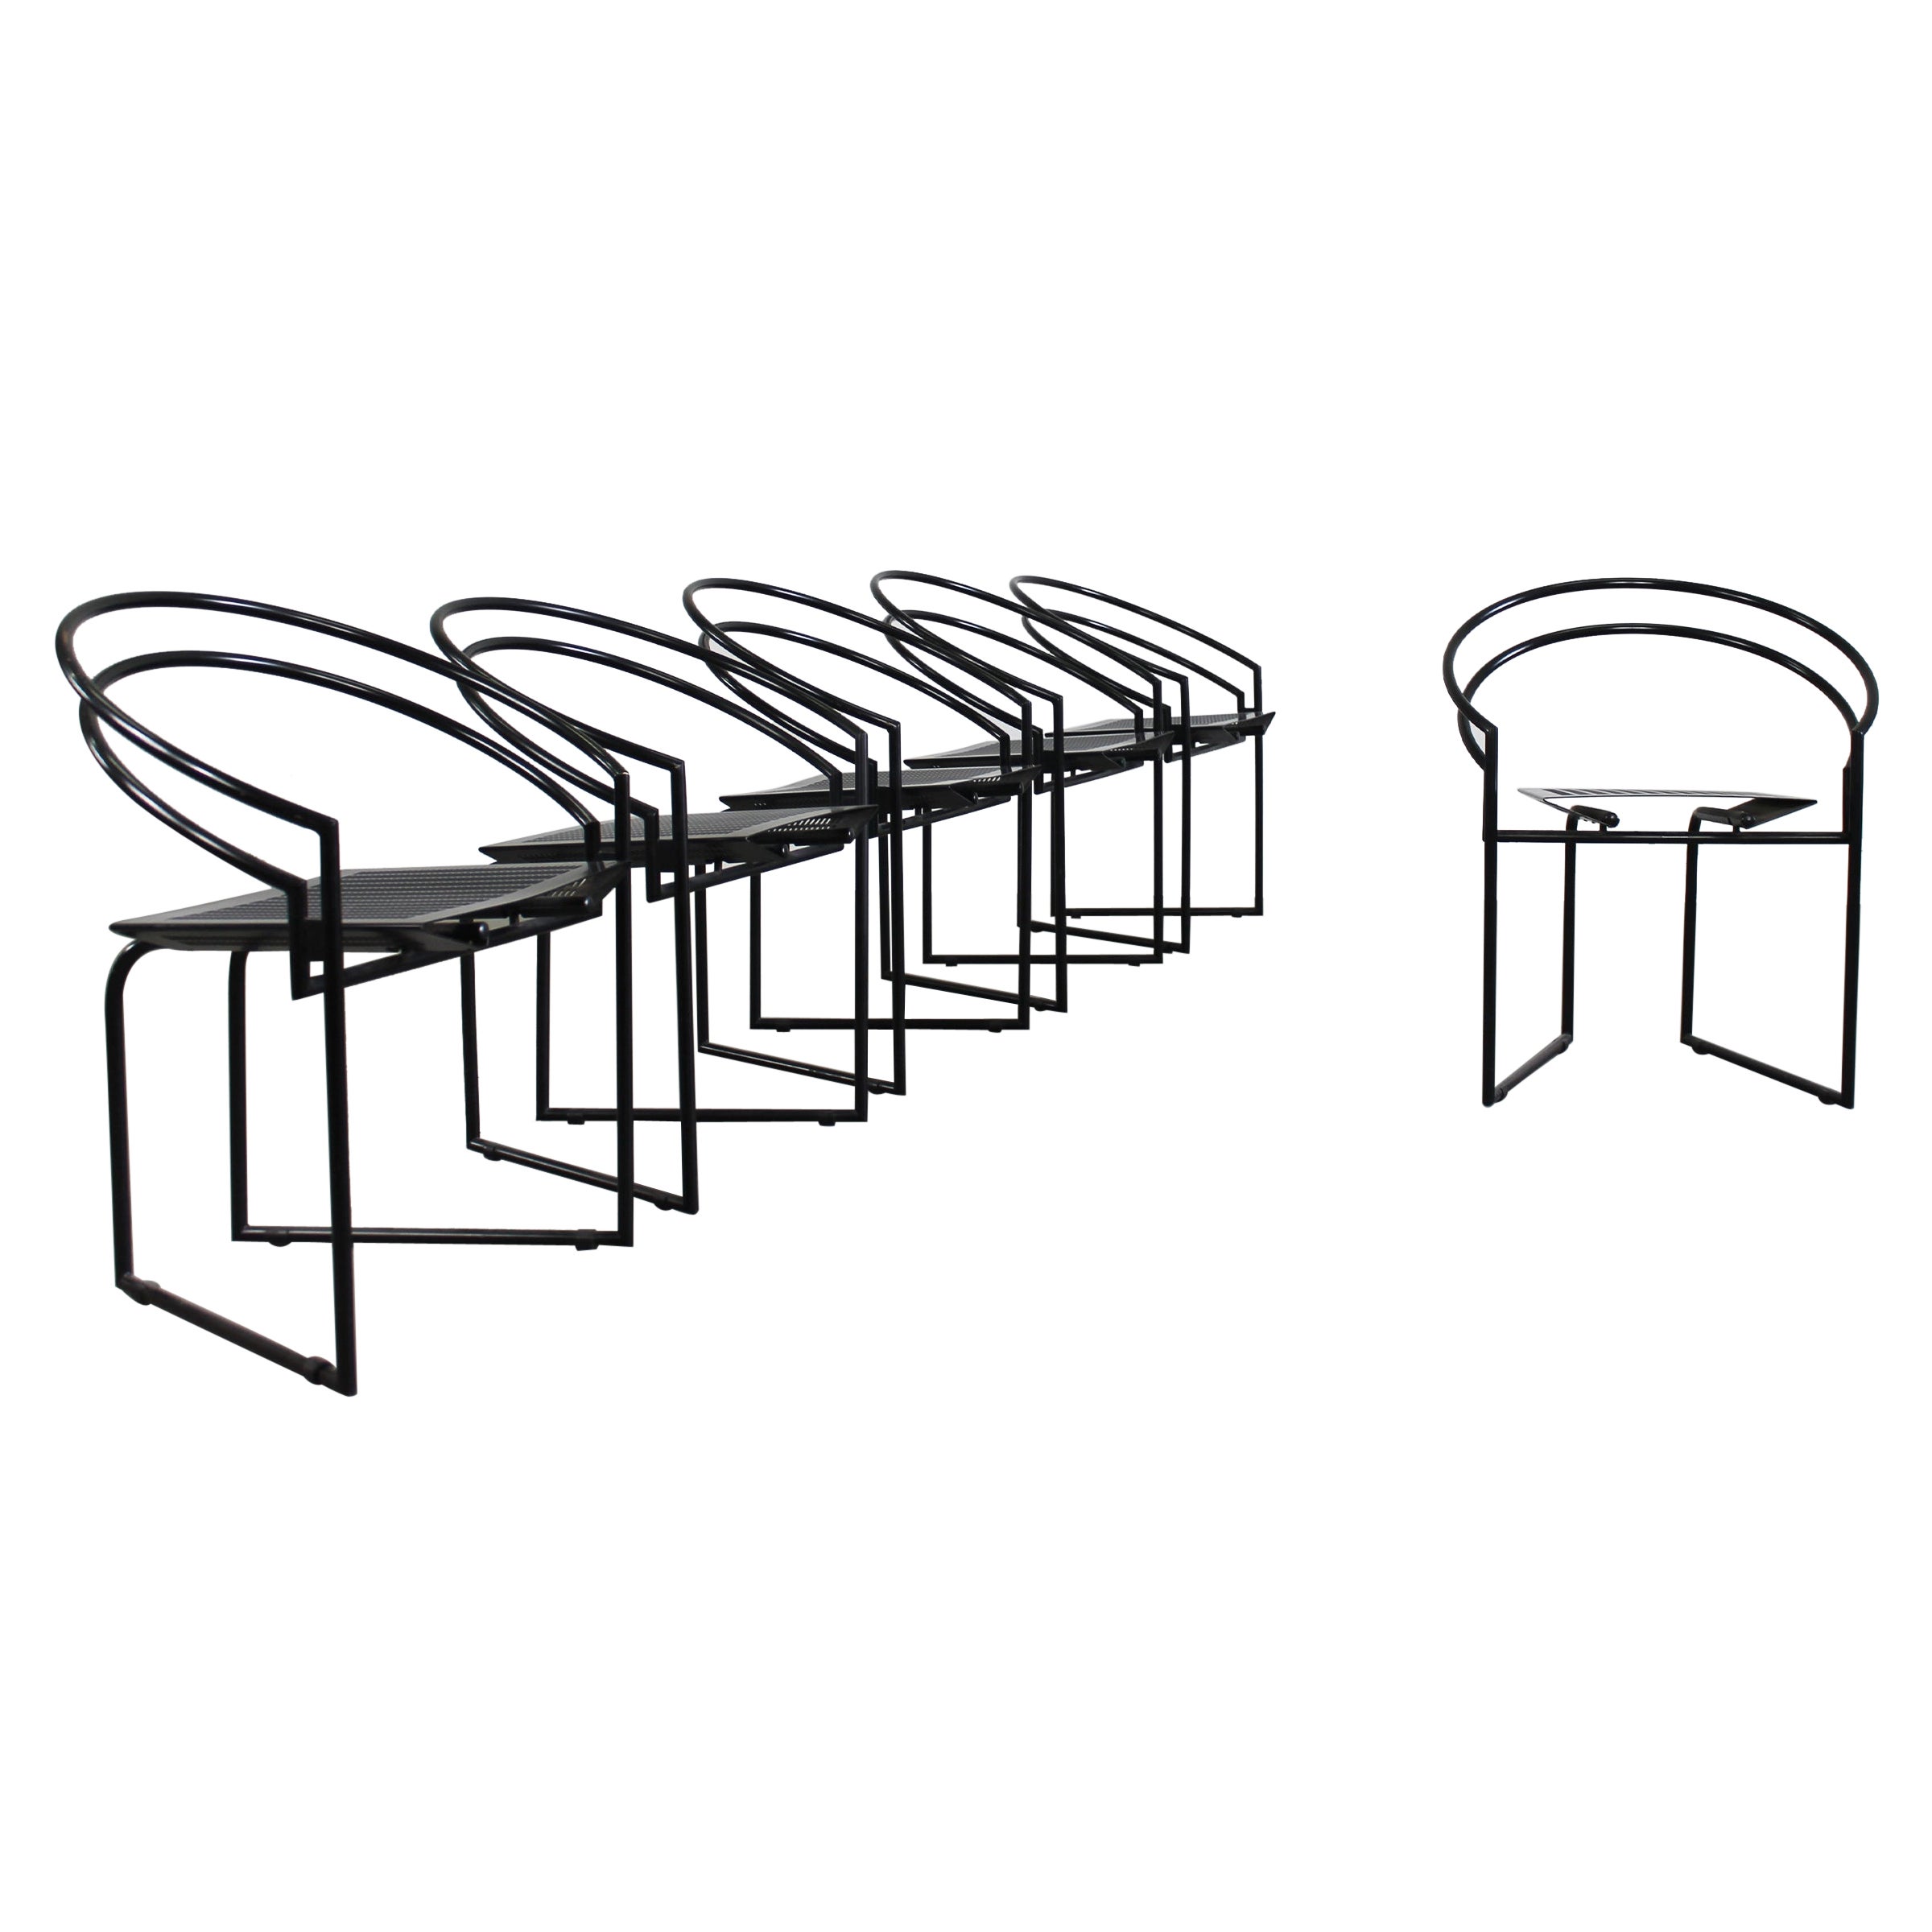 Mario Botta Set of Six La Tonda Chairs in Black Lacquered Metal by Alias 1980s For Sale